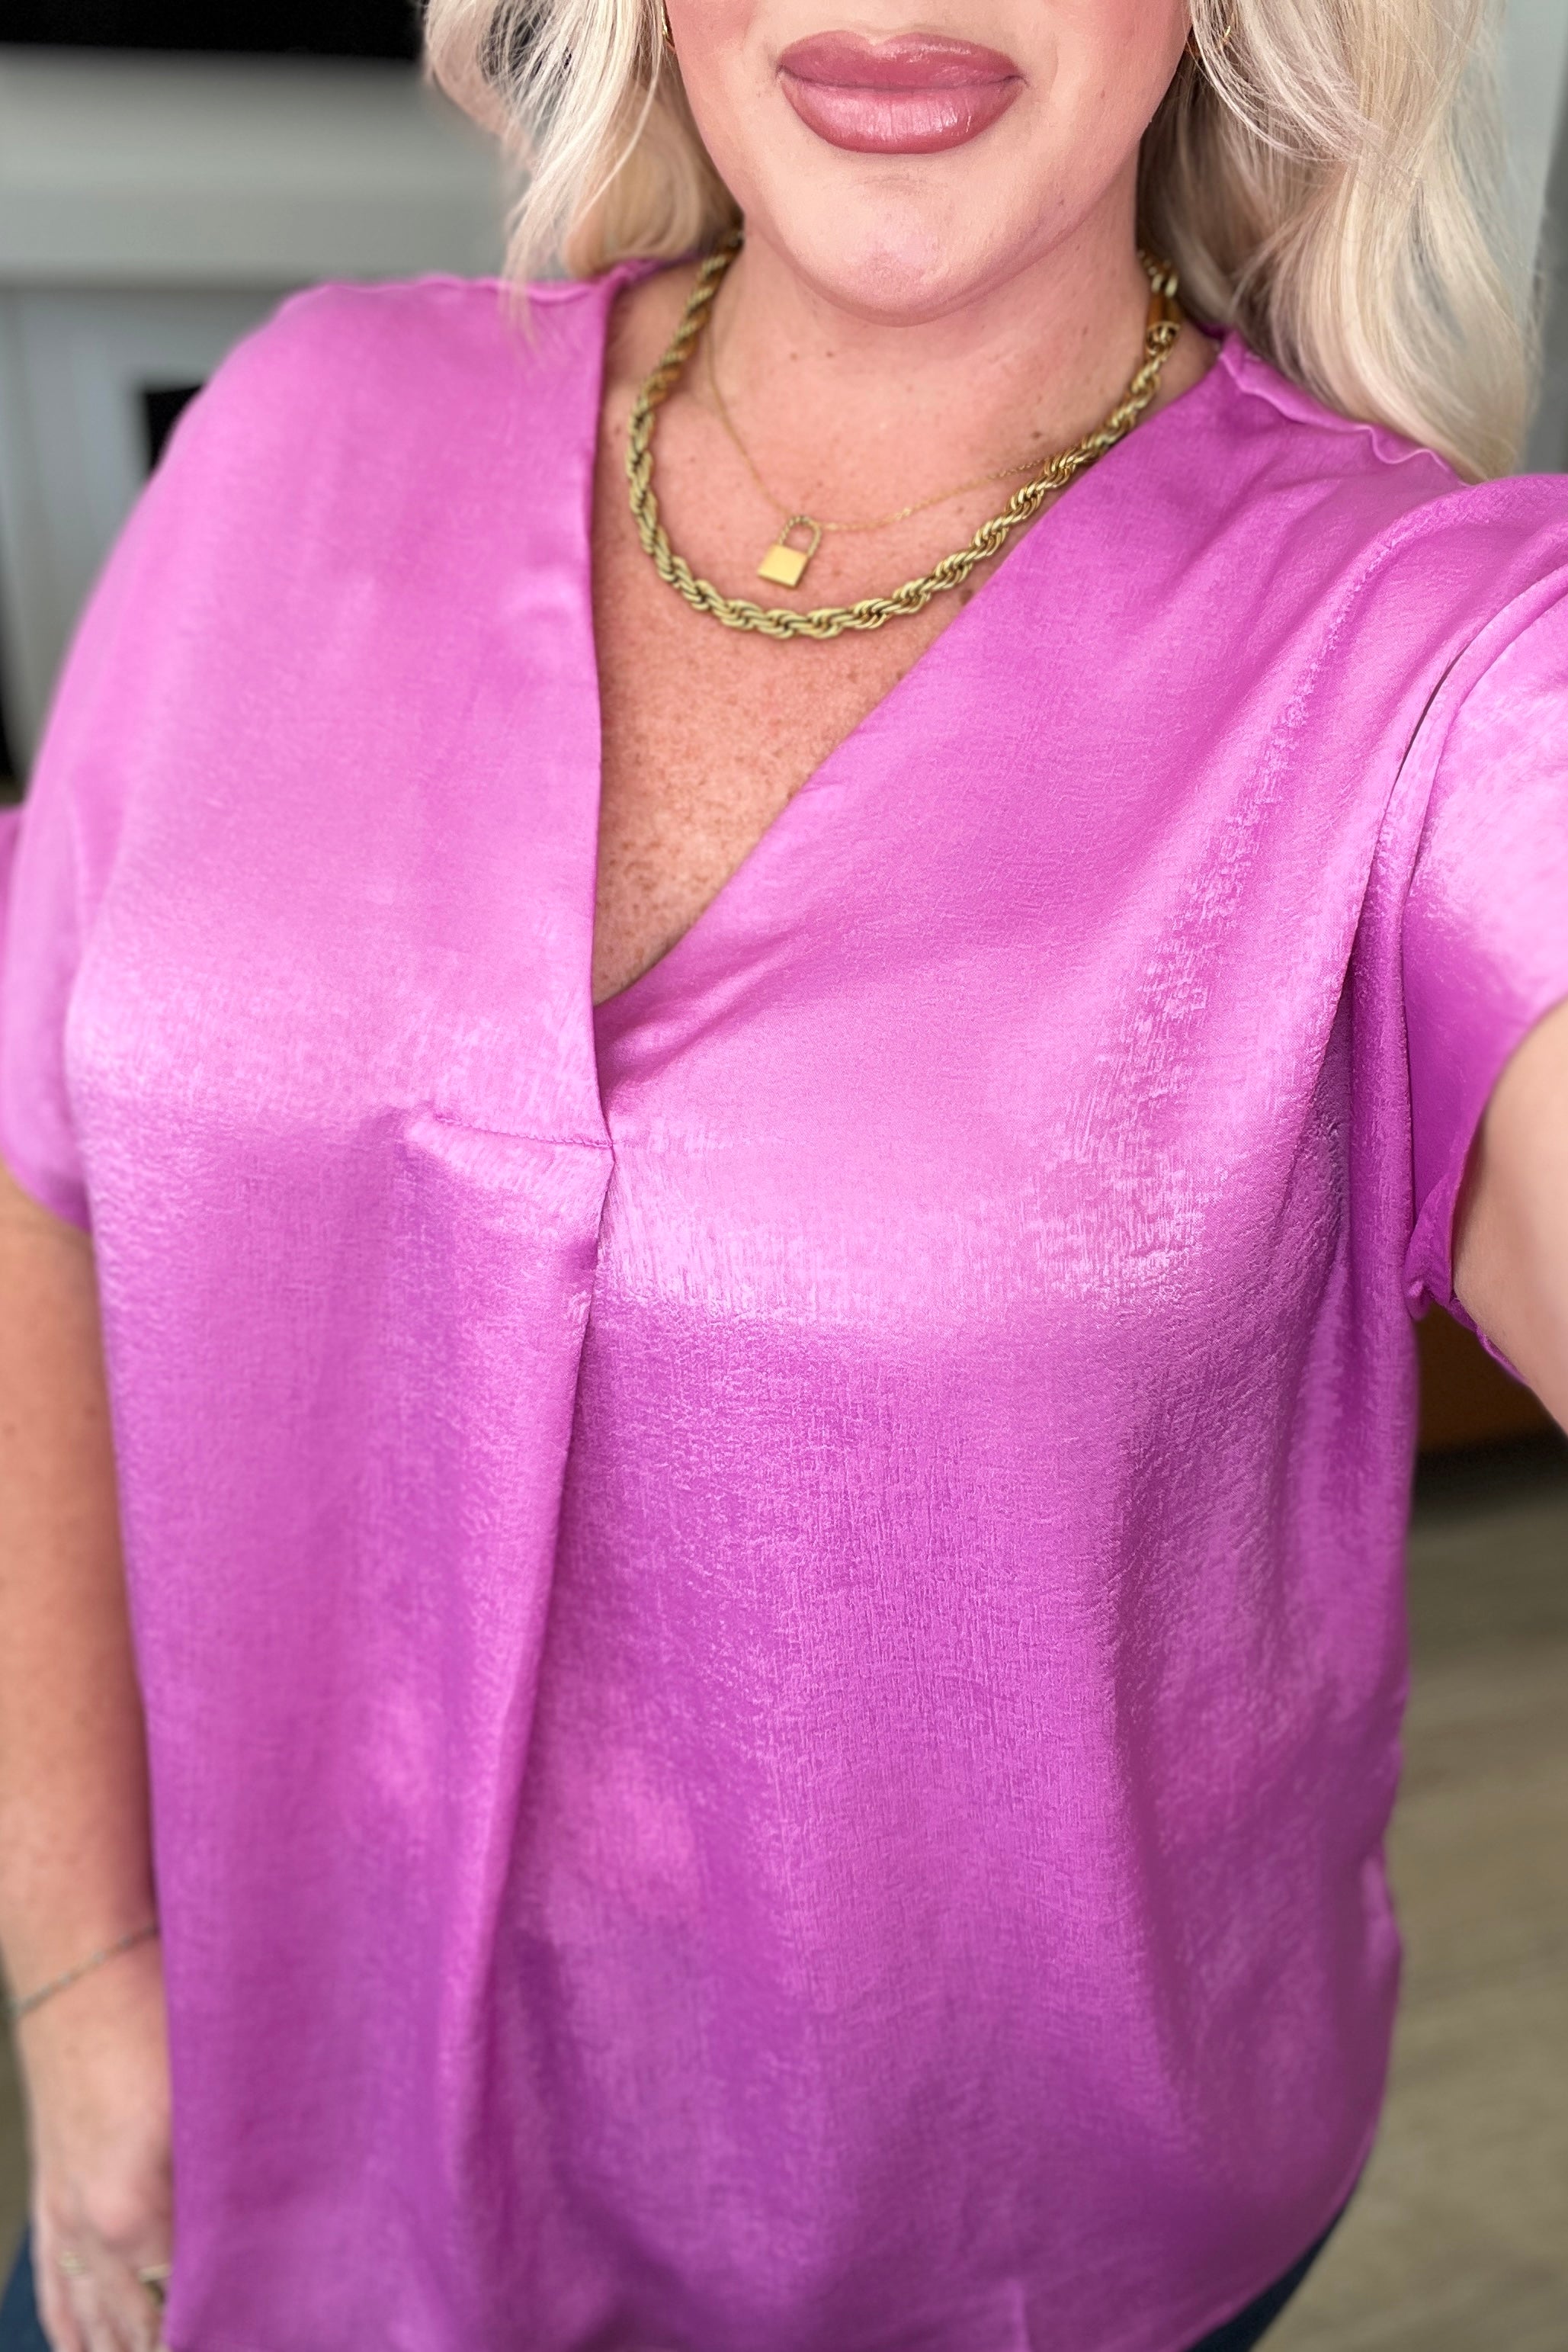 DOORBUSTER: Pleat Front V-Neck Top in Spring Orchid (Ships in 1-2 Weeks)